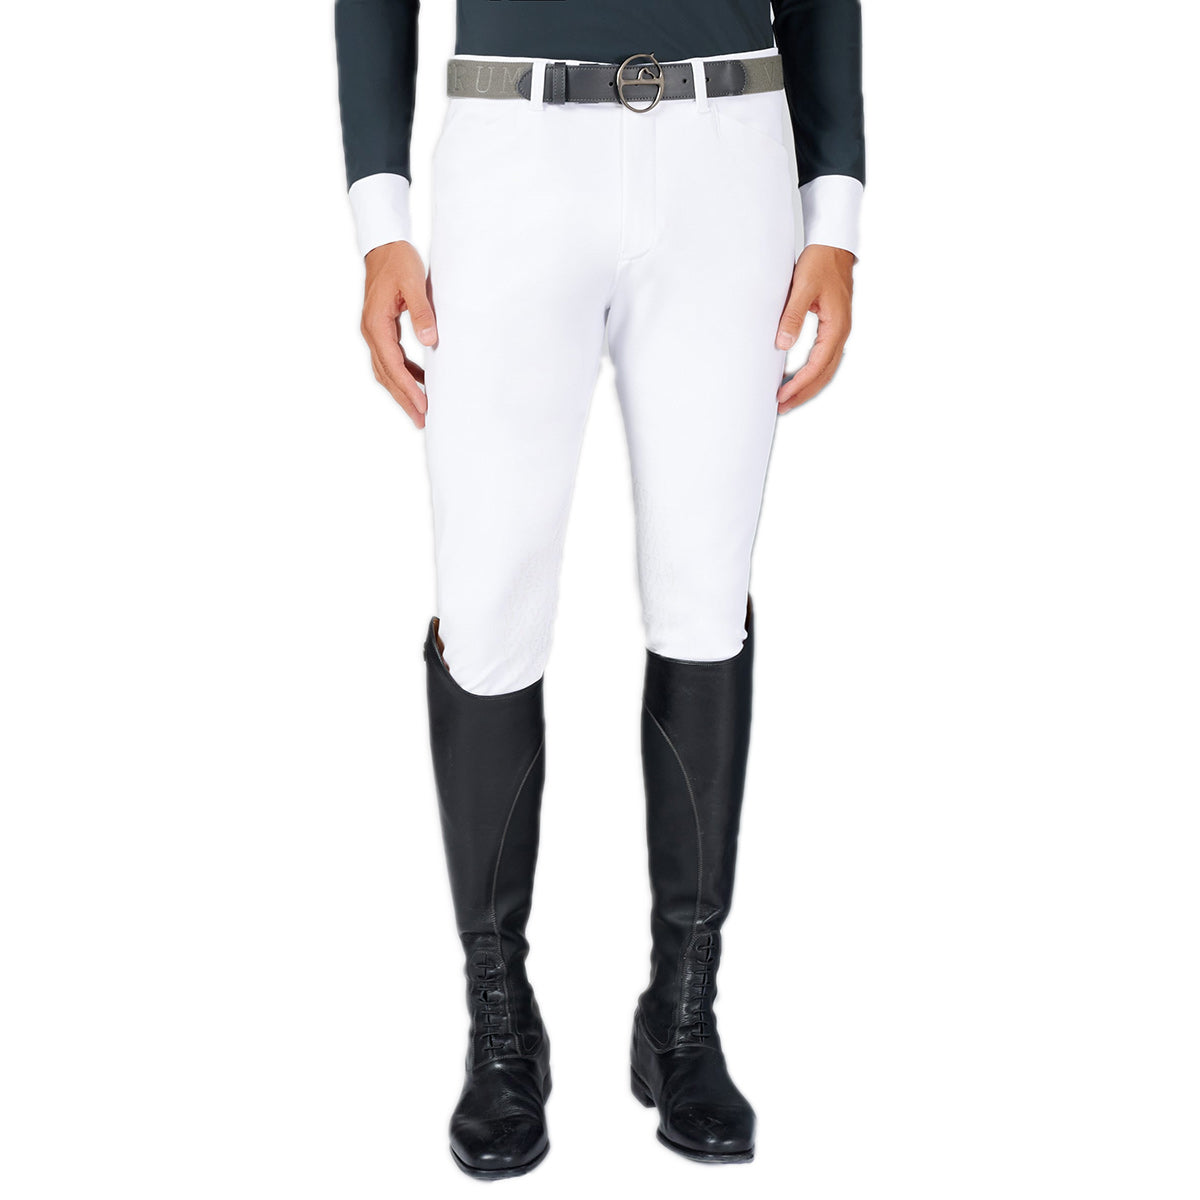 ELATION Horseback Riding Pants for Girls  Boys  Euro Seat Kids Riding  Pants wLeather Knee Patch  Thick Elastic Band Tan Riding Tights for  Equestrian Junior Competitor Classic Kids Breeches 8 